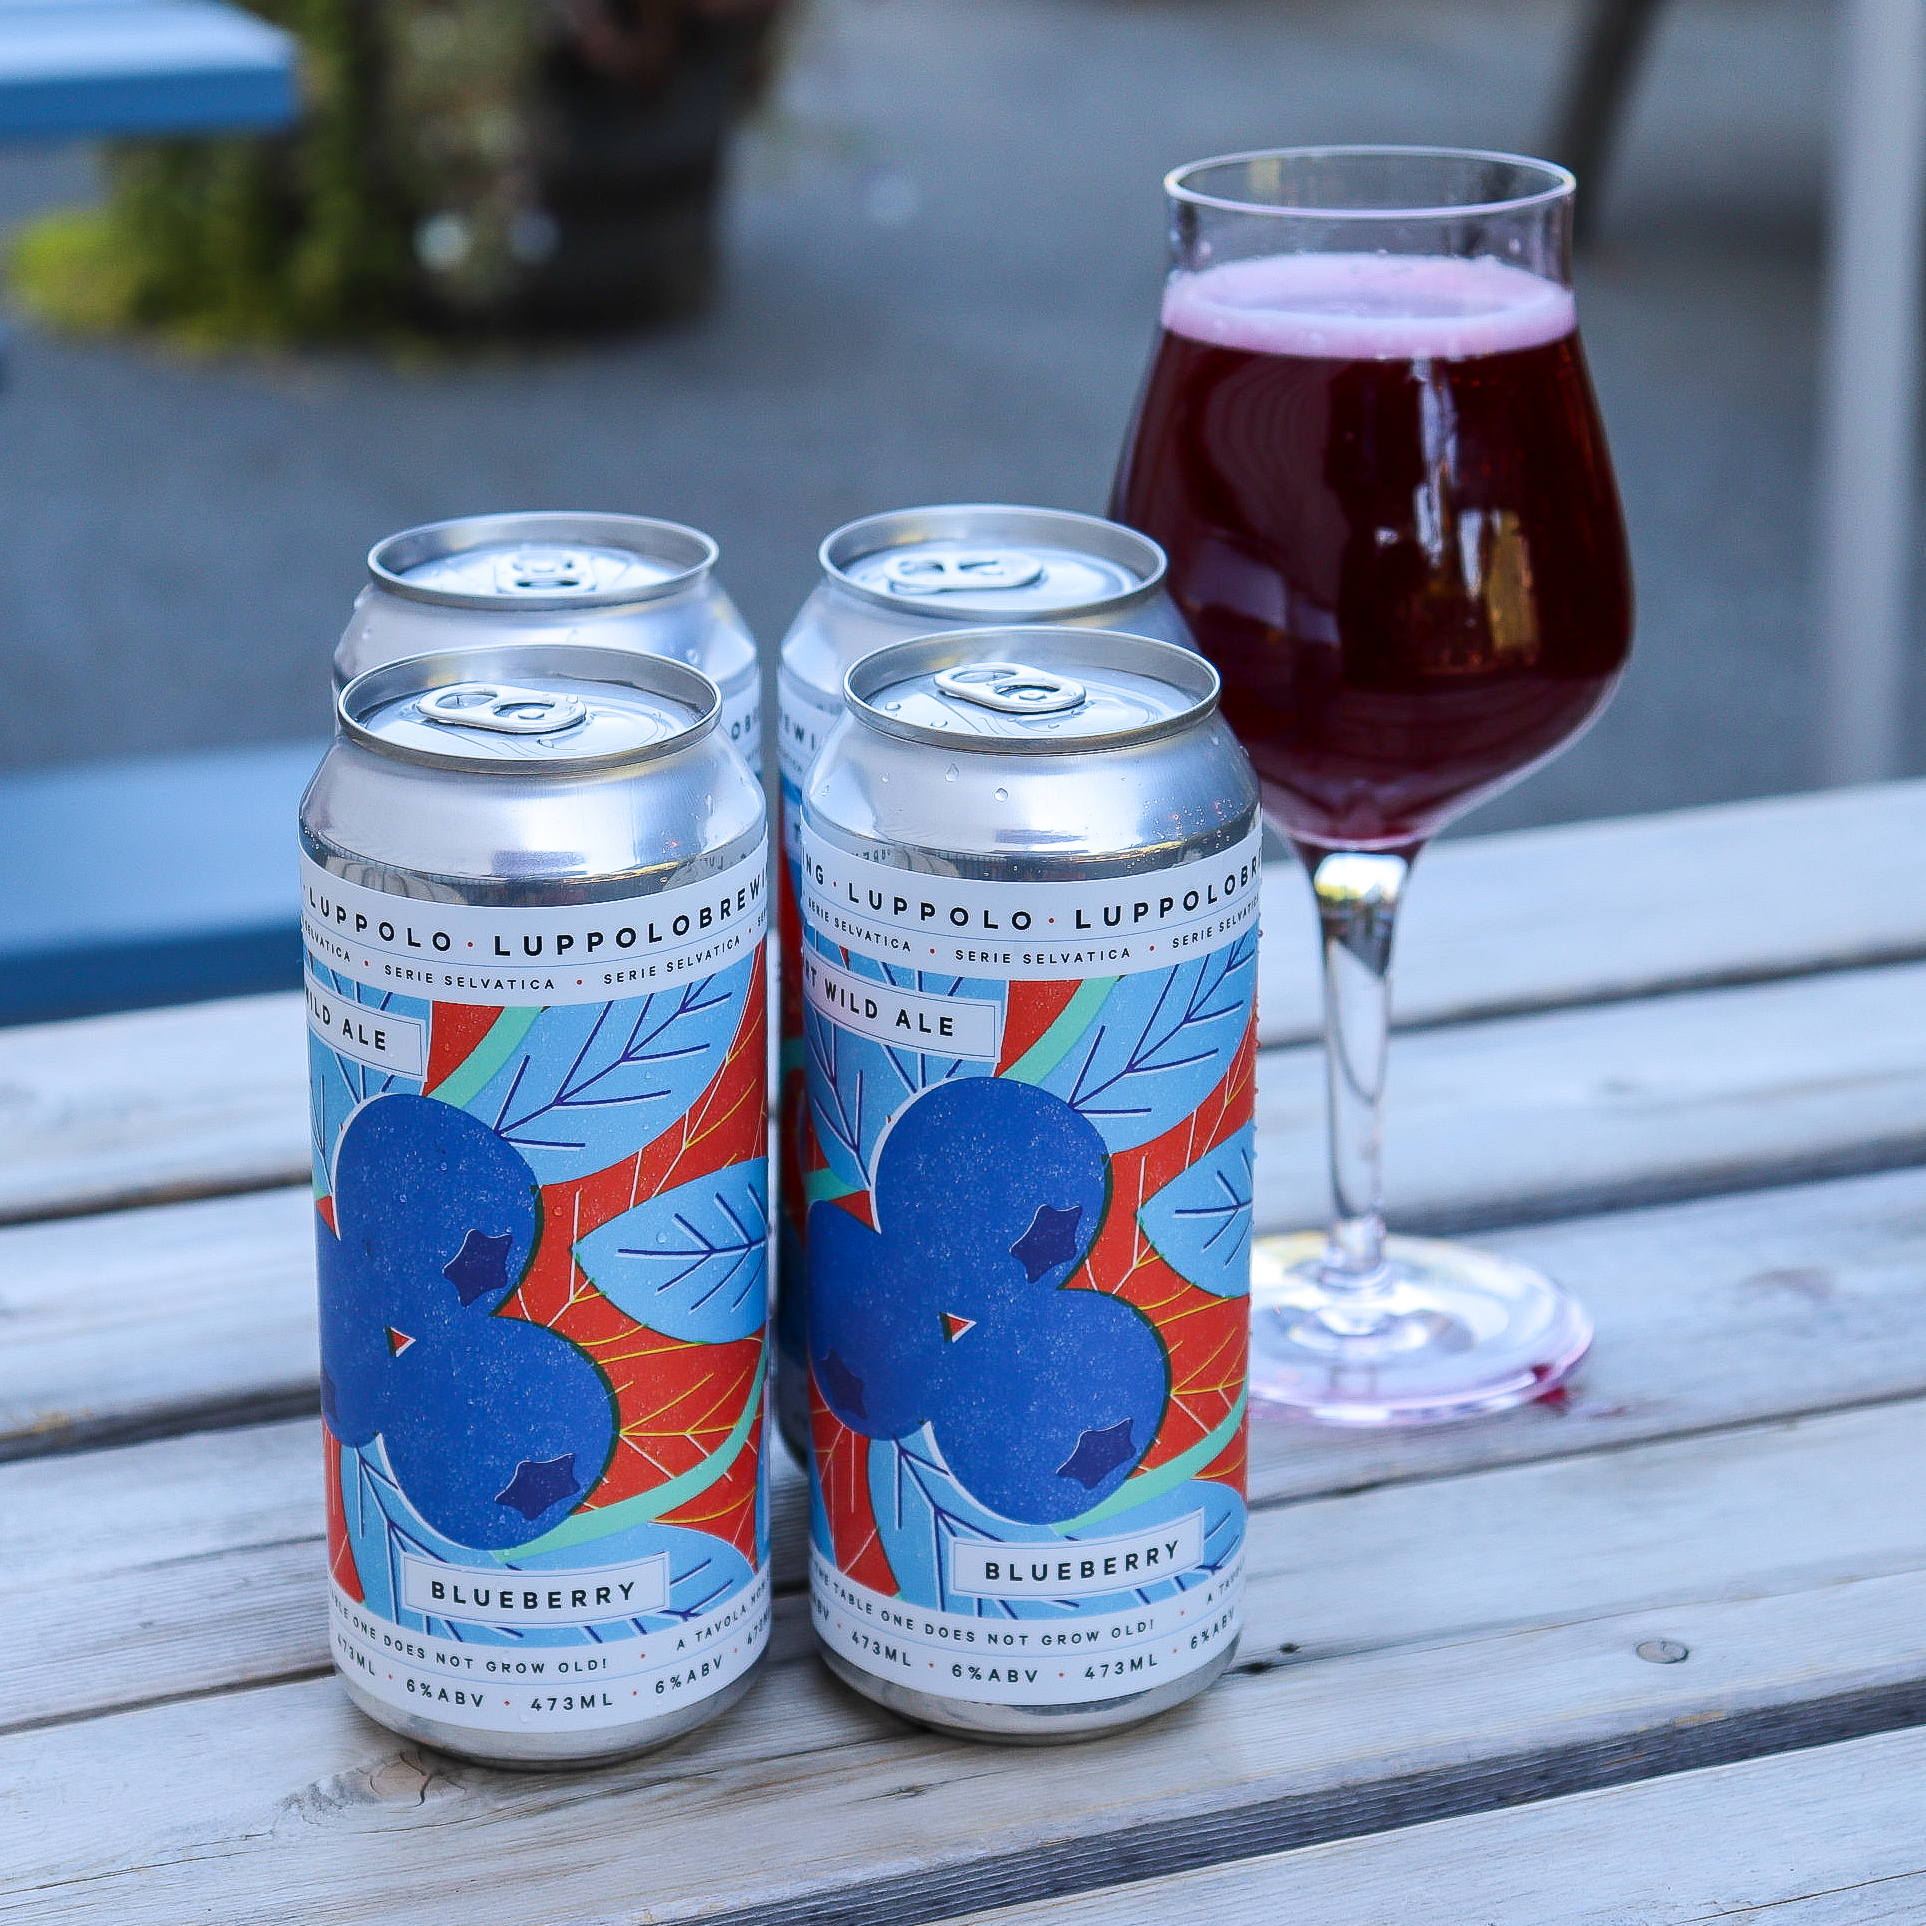 Tart Wild Ale with Blueberry